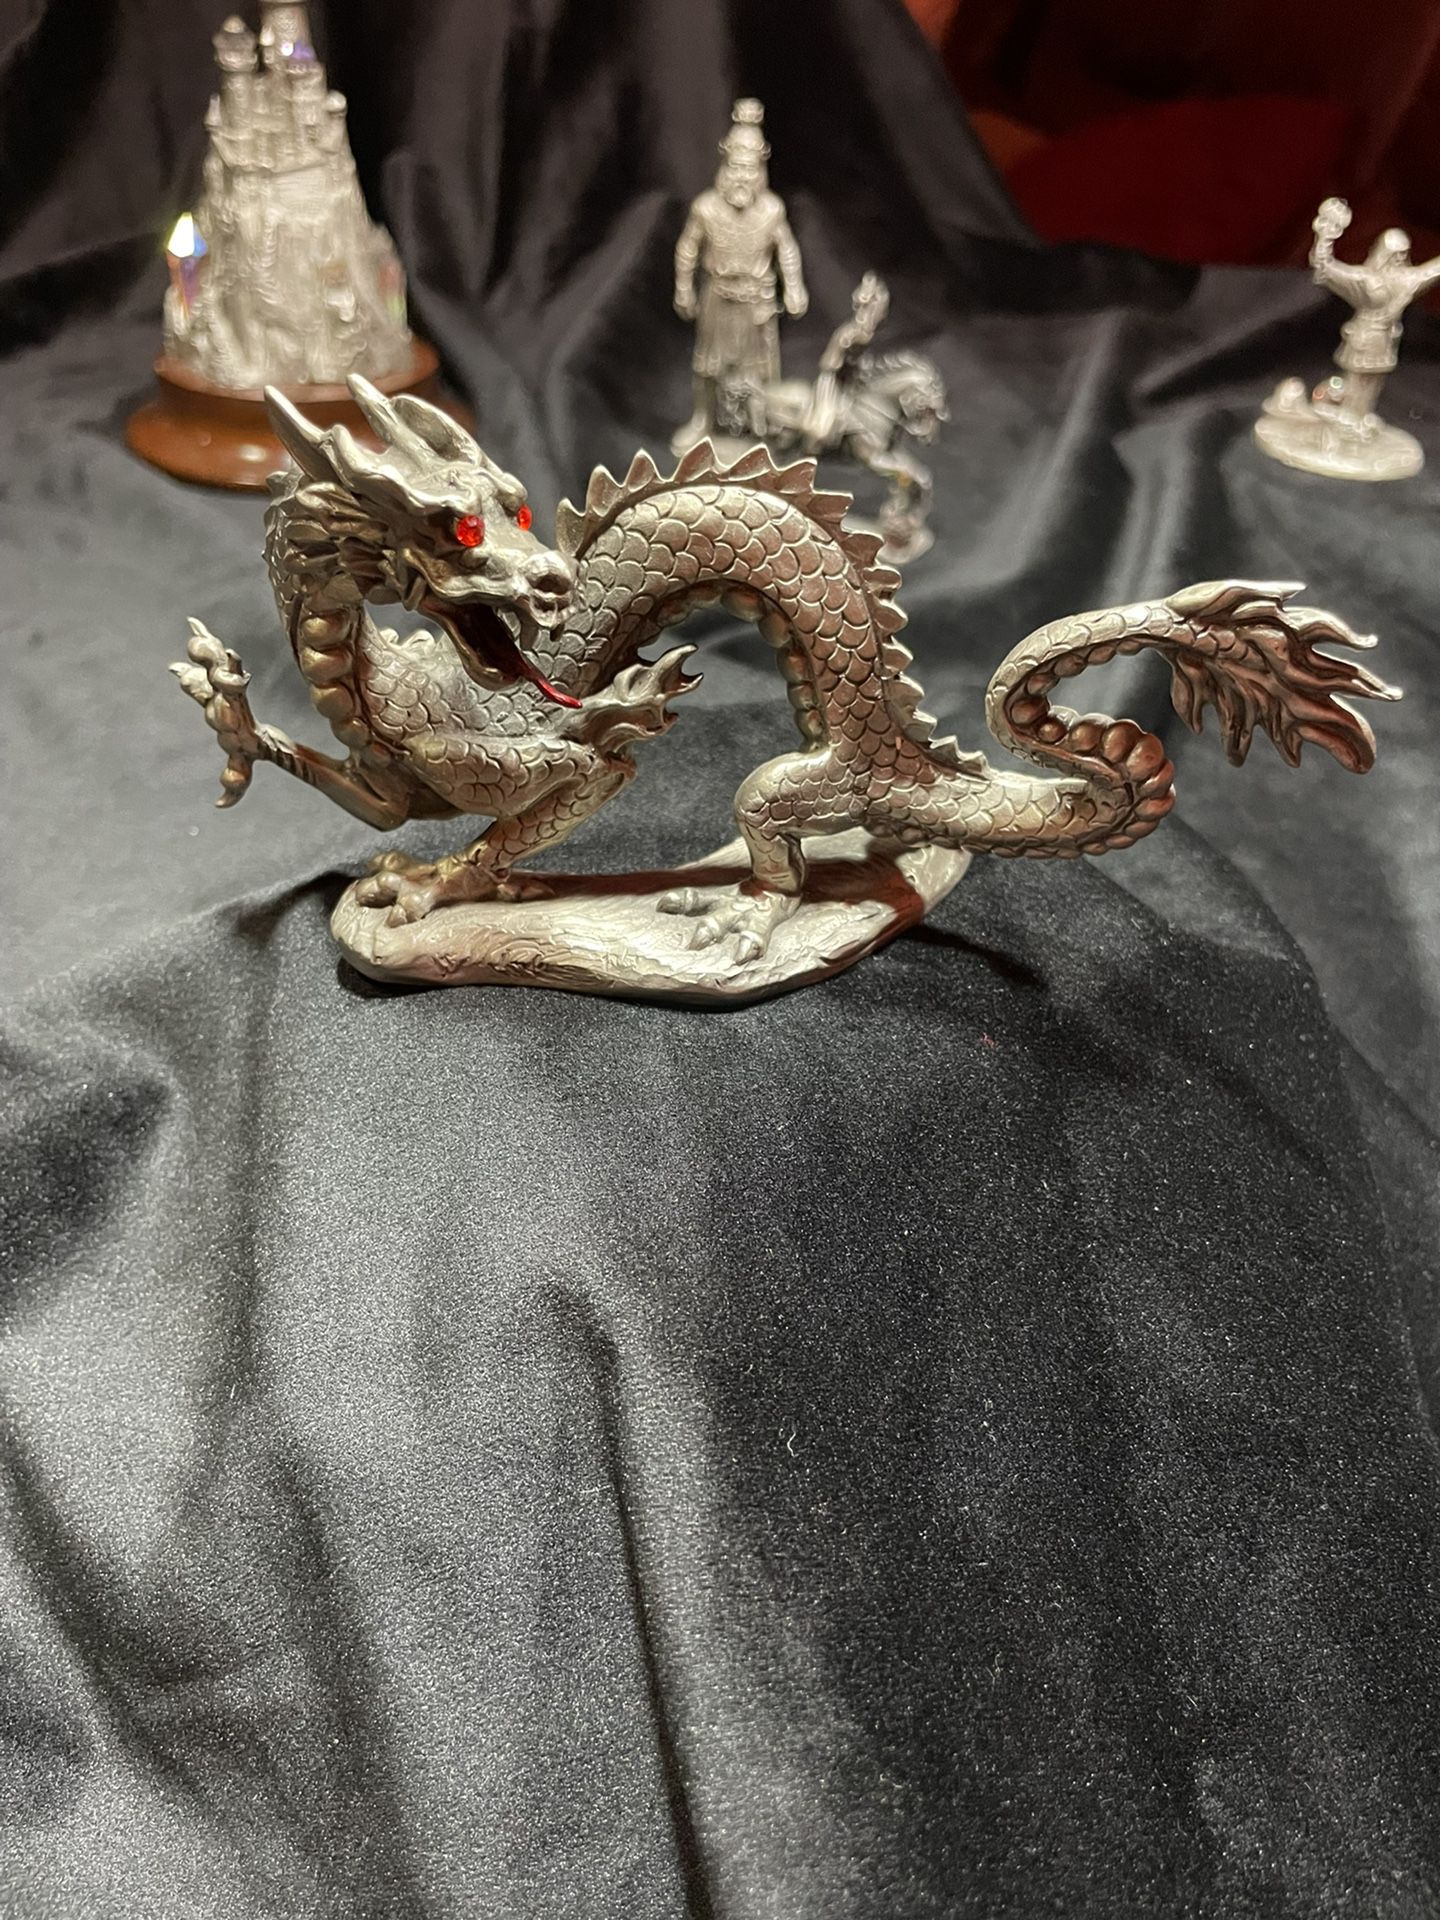 Hudson 1986 Fine Pewter Dragon Made in USA  Red Eye Breathing Fire Heavy Unique